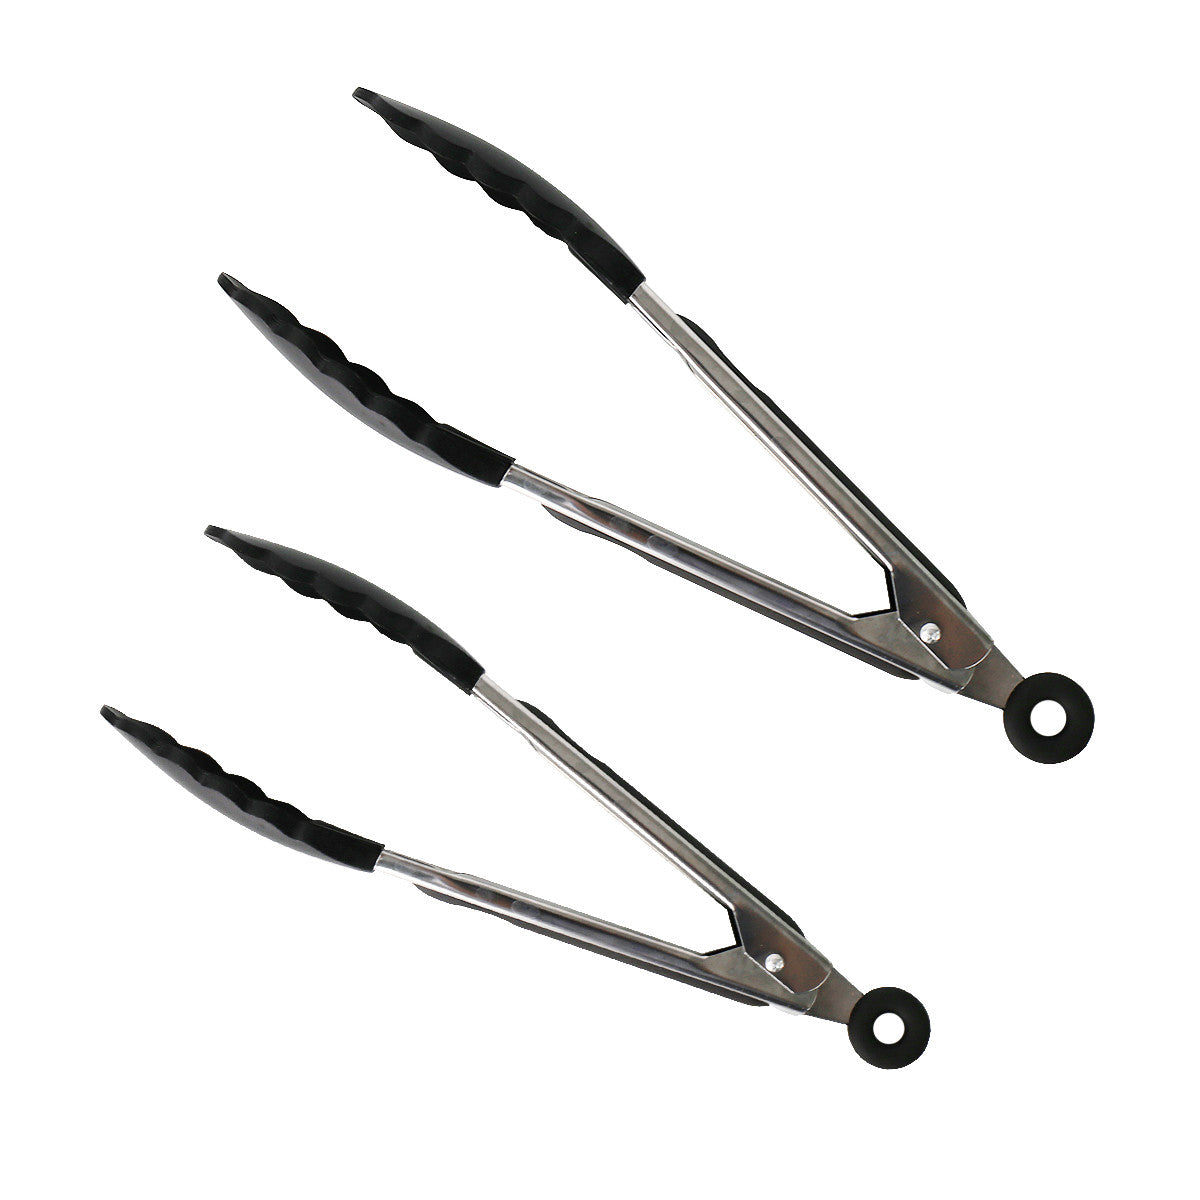 Set of 2 Grilling Cooking Tongs Small 9-Inch & Large 12-Inch